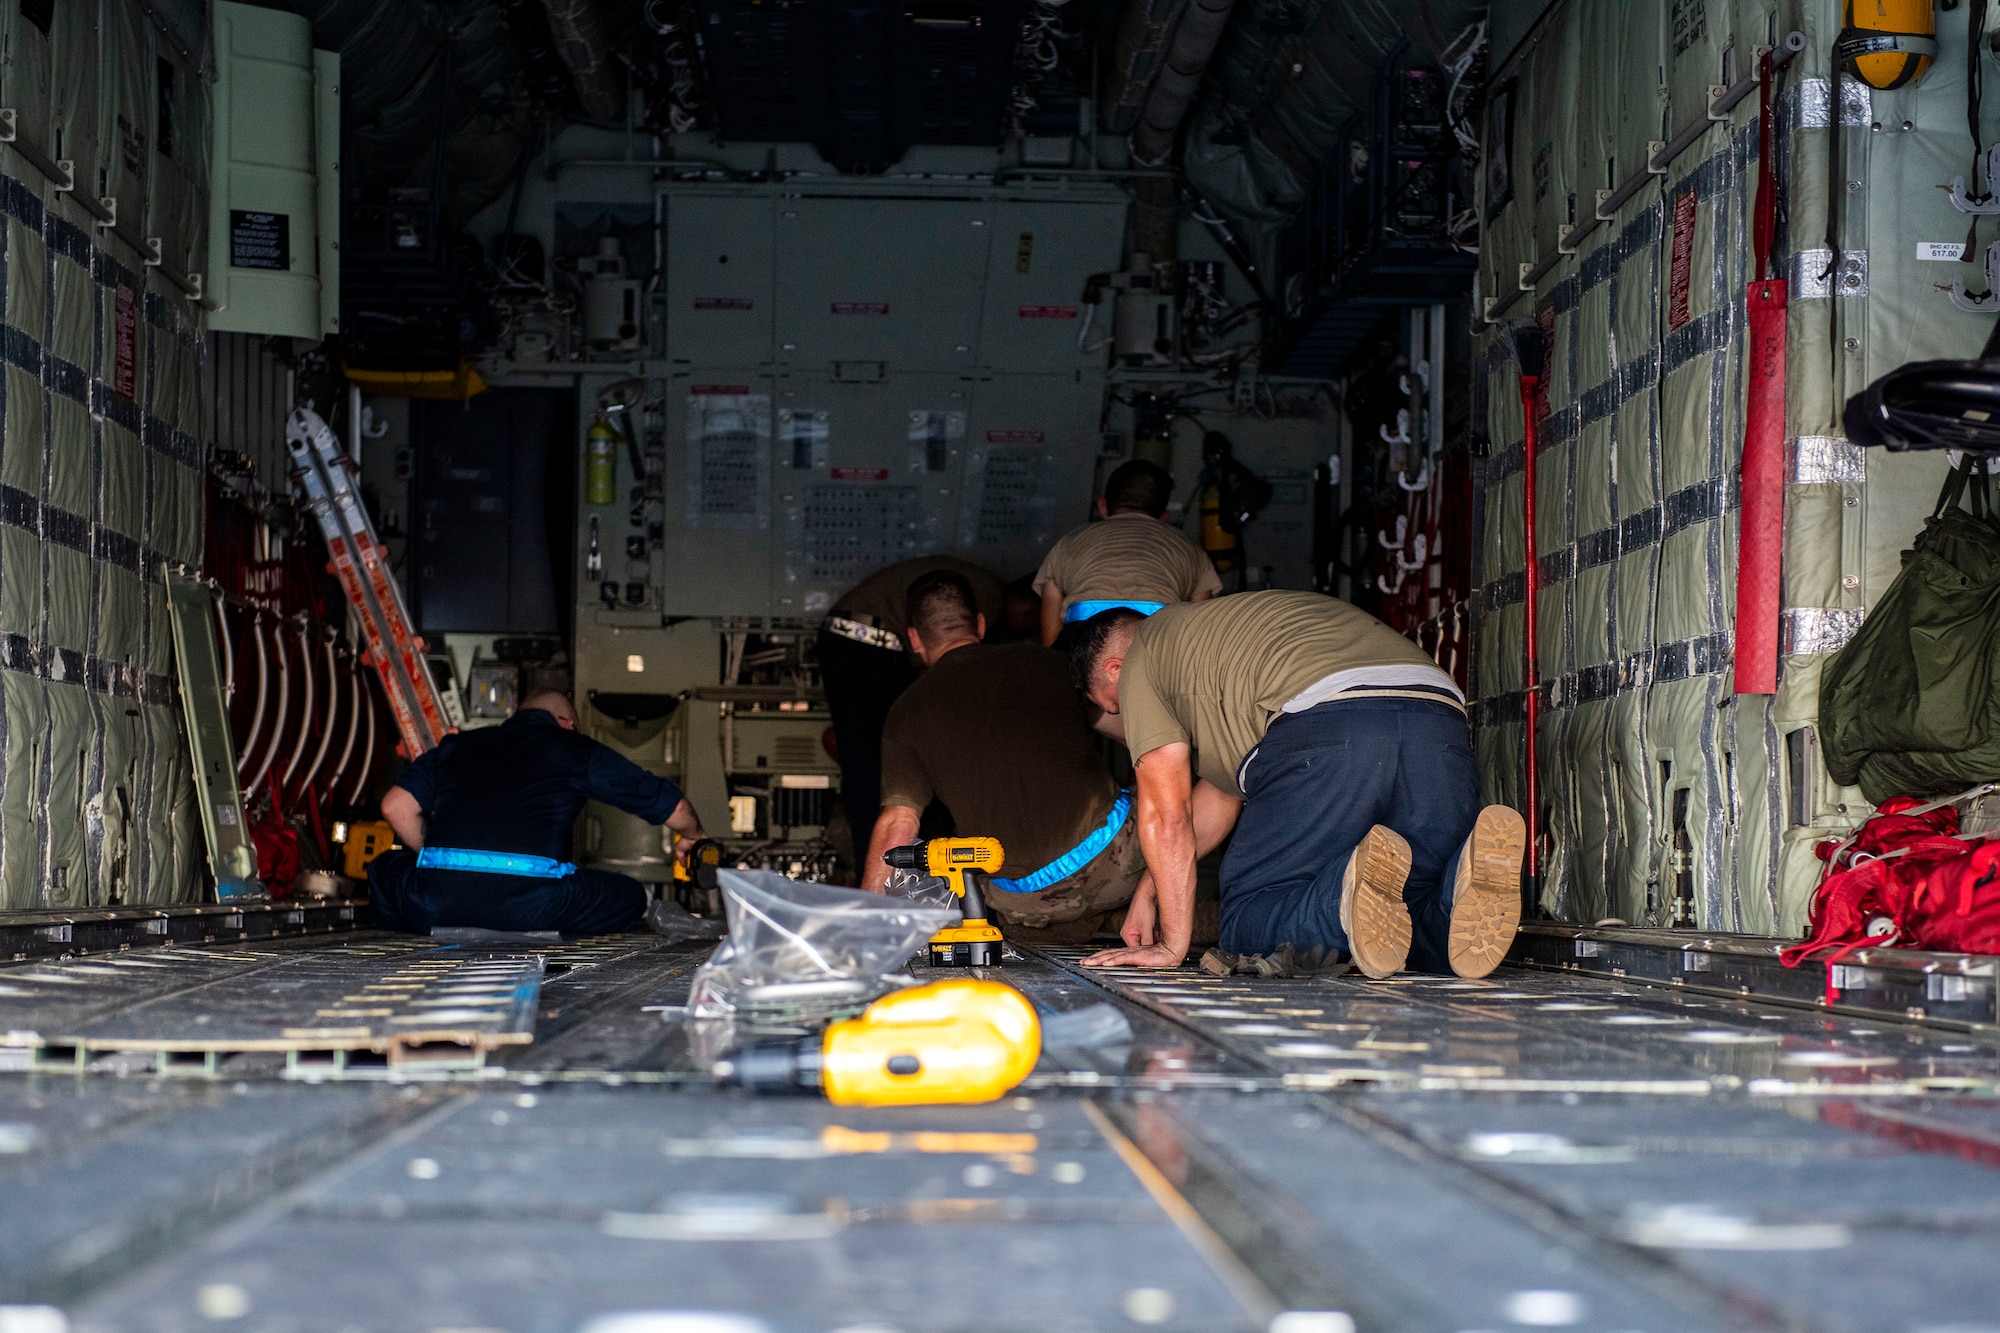 Airmen with the 71st Aircraft Maintenance Unit remove cargo floor panels during preparation of an HC-130J Combat King II for a situational awareness communication upgrade (SACU) modification Sept. 25, 2019, at Moody Air Force Base, Ga. The panels are removed to allow access to the area inside the aircraft where the SACU will be installed. This SACU will enhance the aircraft’s ability to communicate with personnel on the ground during search and rescue operations. (U.S. Air Force photo by Senior Airman Erick Requadt)